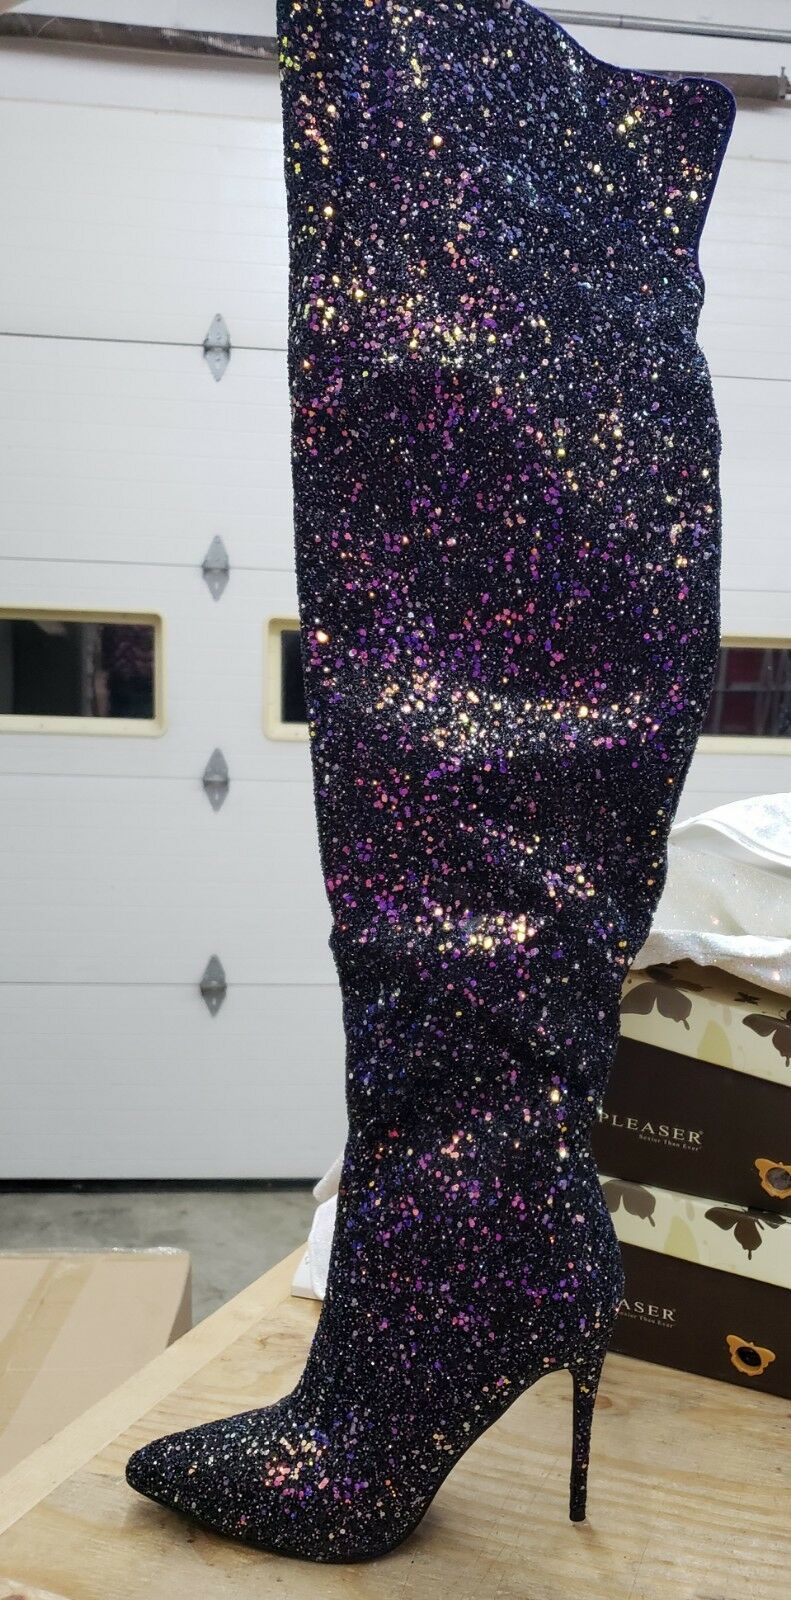 Courtly 3015 Black Multi Color Glitter Thigh High Boots 5" High Heel 6 - 14 - Totally Wicked Footwear